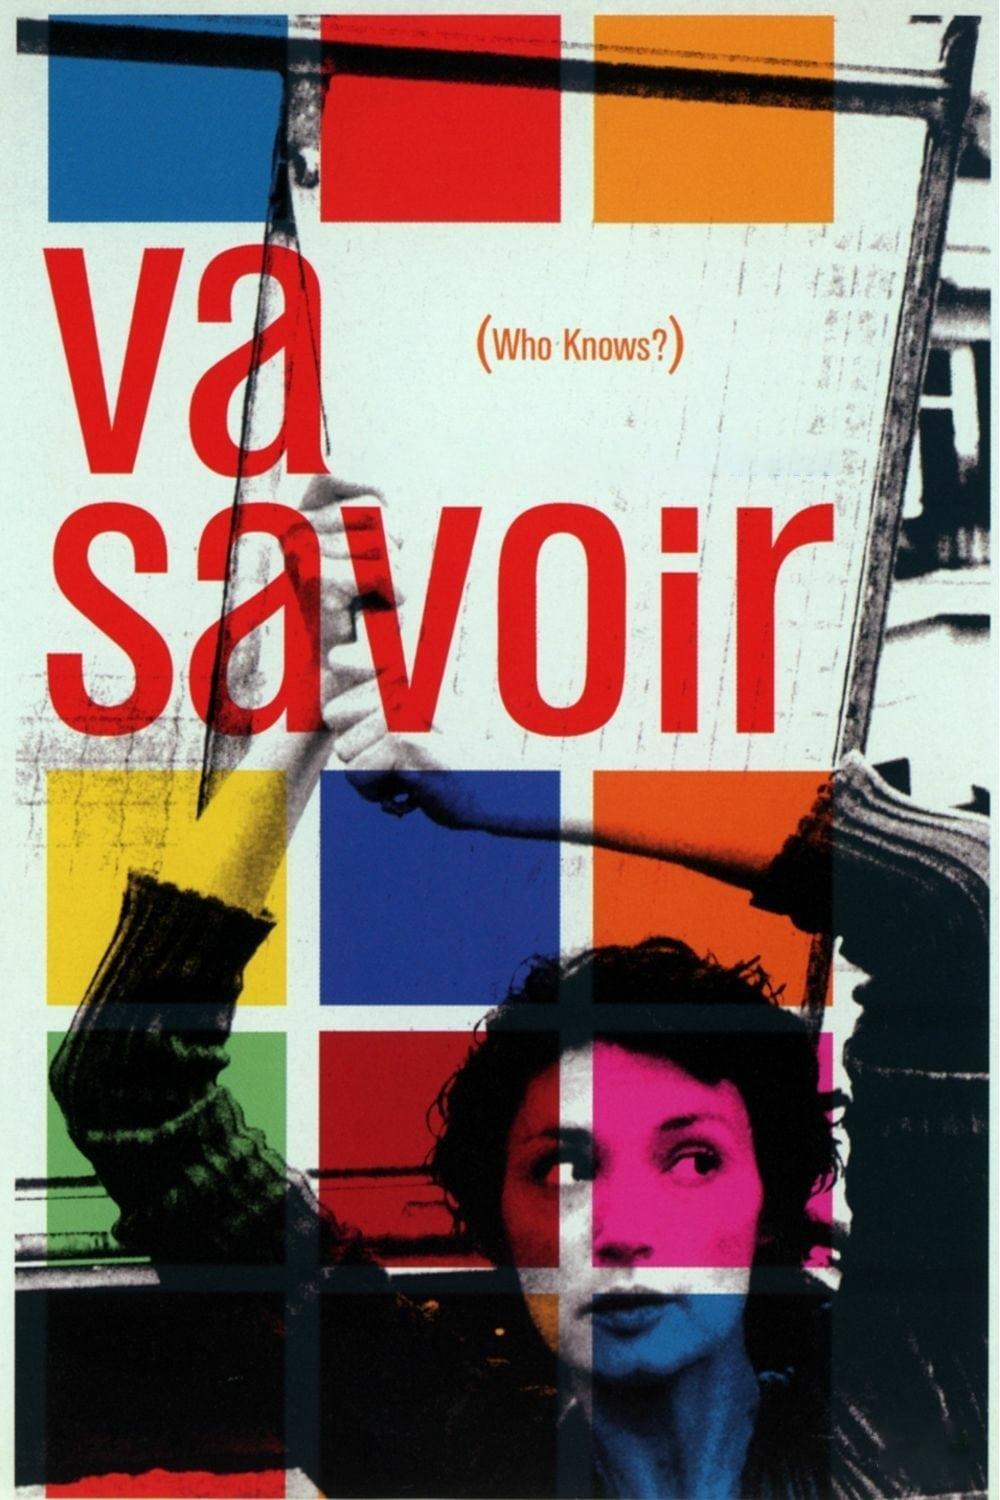 Va Savoir (Who Knows?) poster